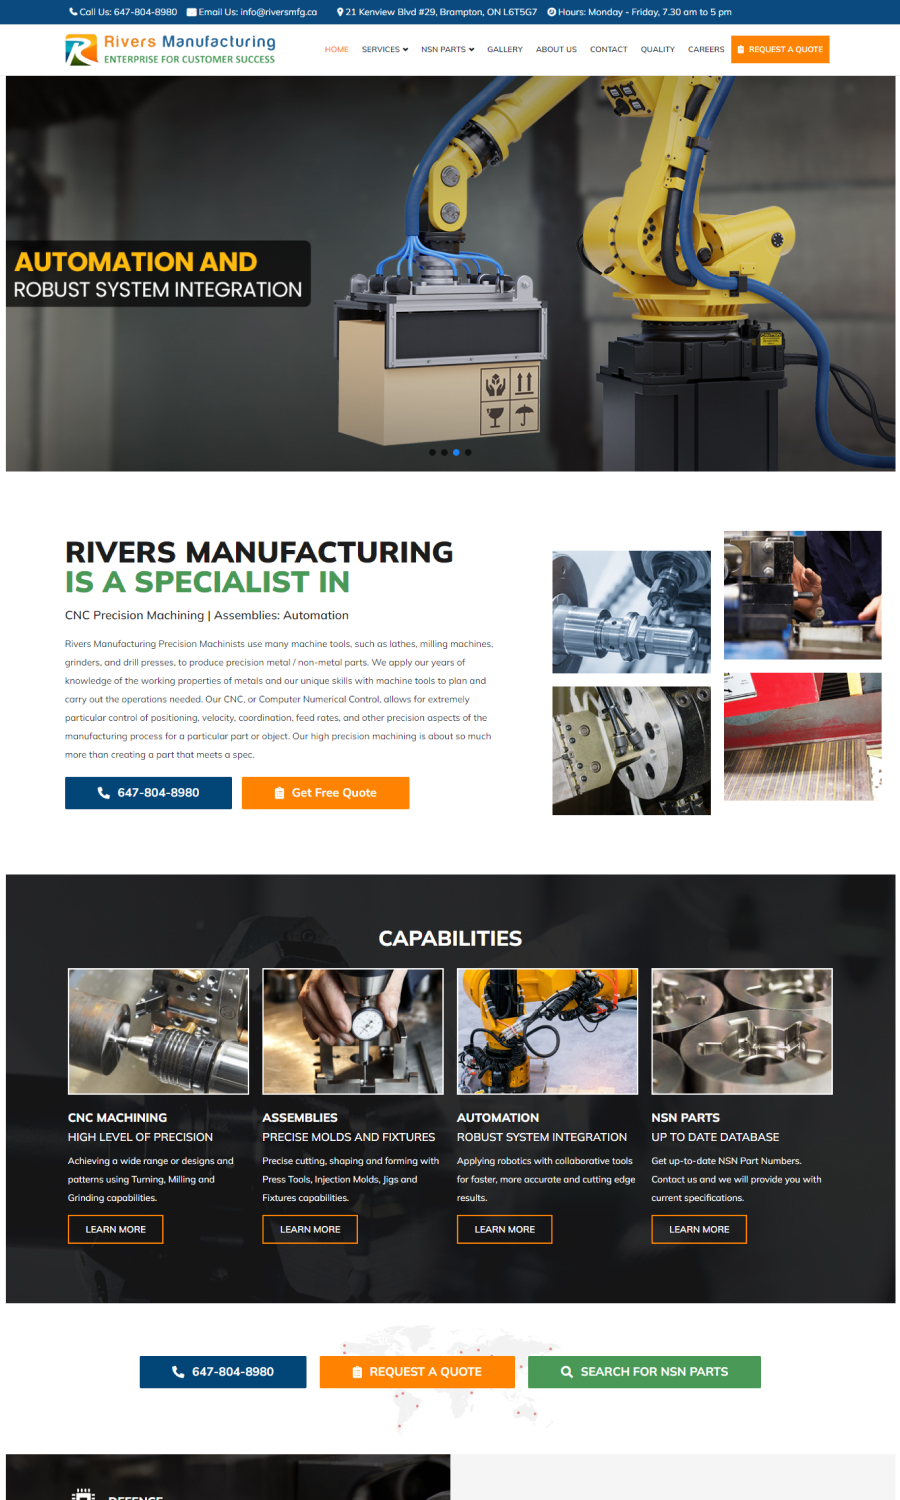 Rivers Manufacturing